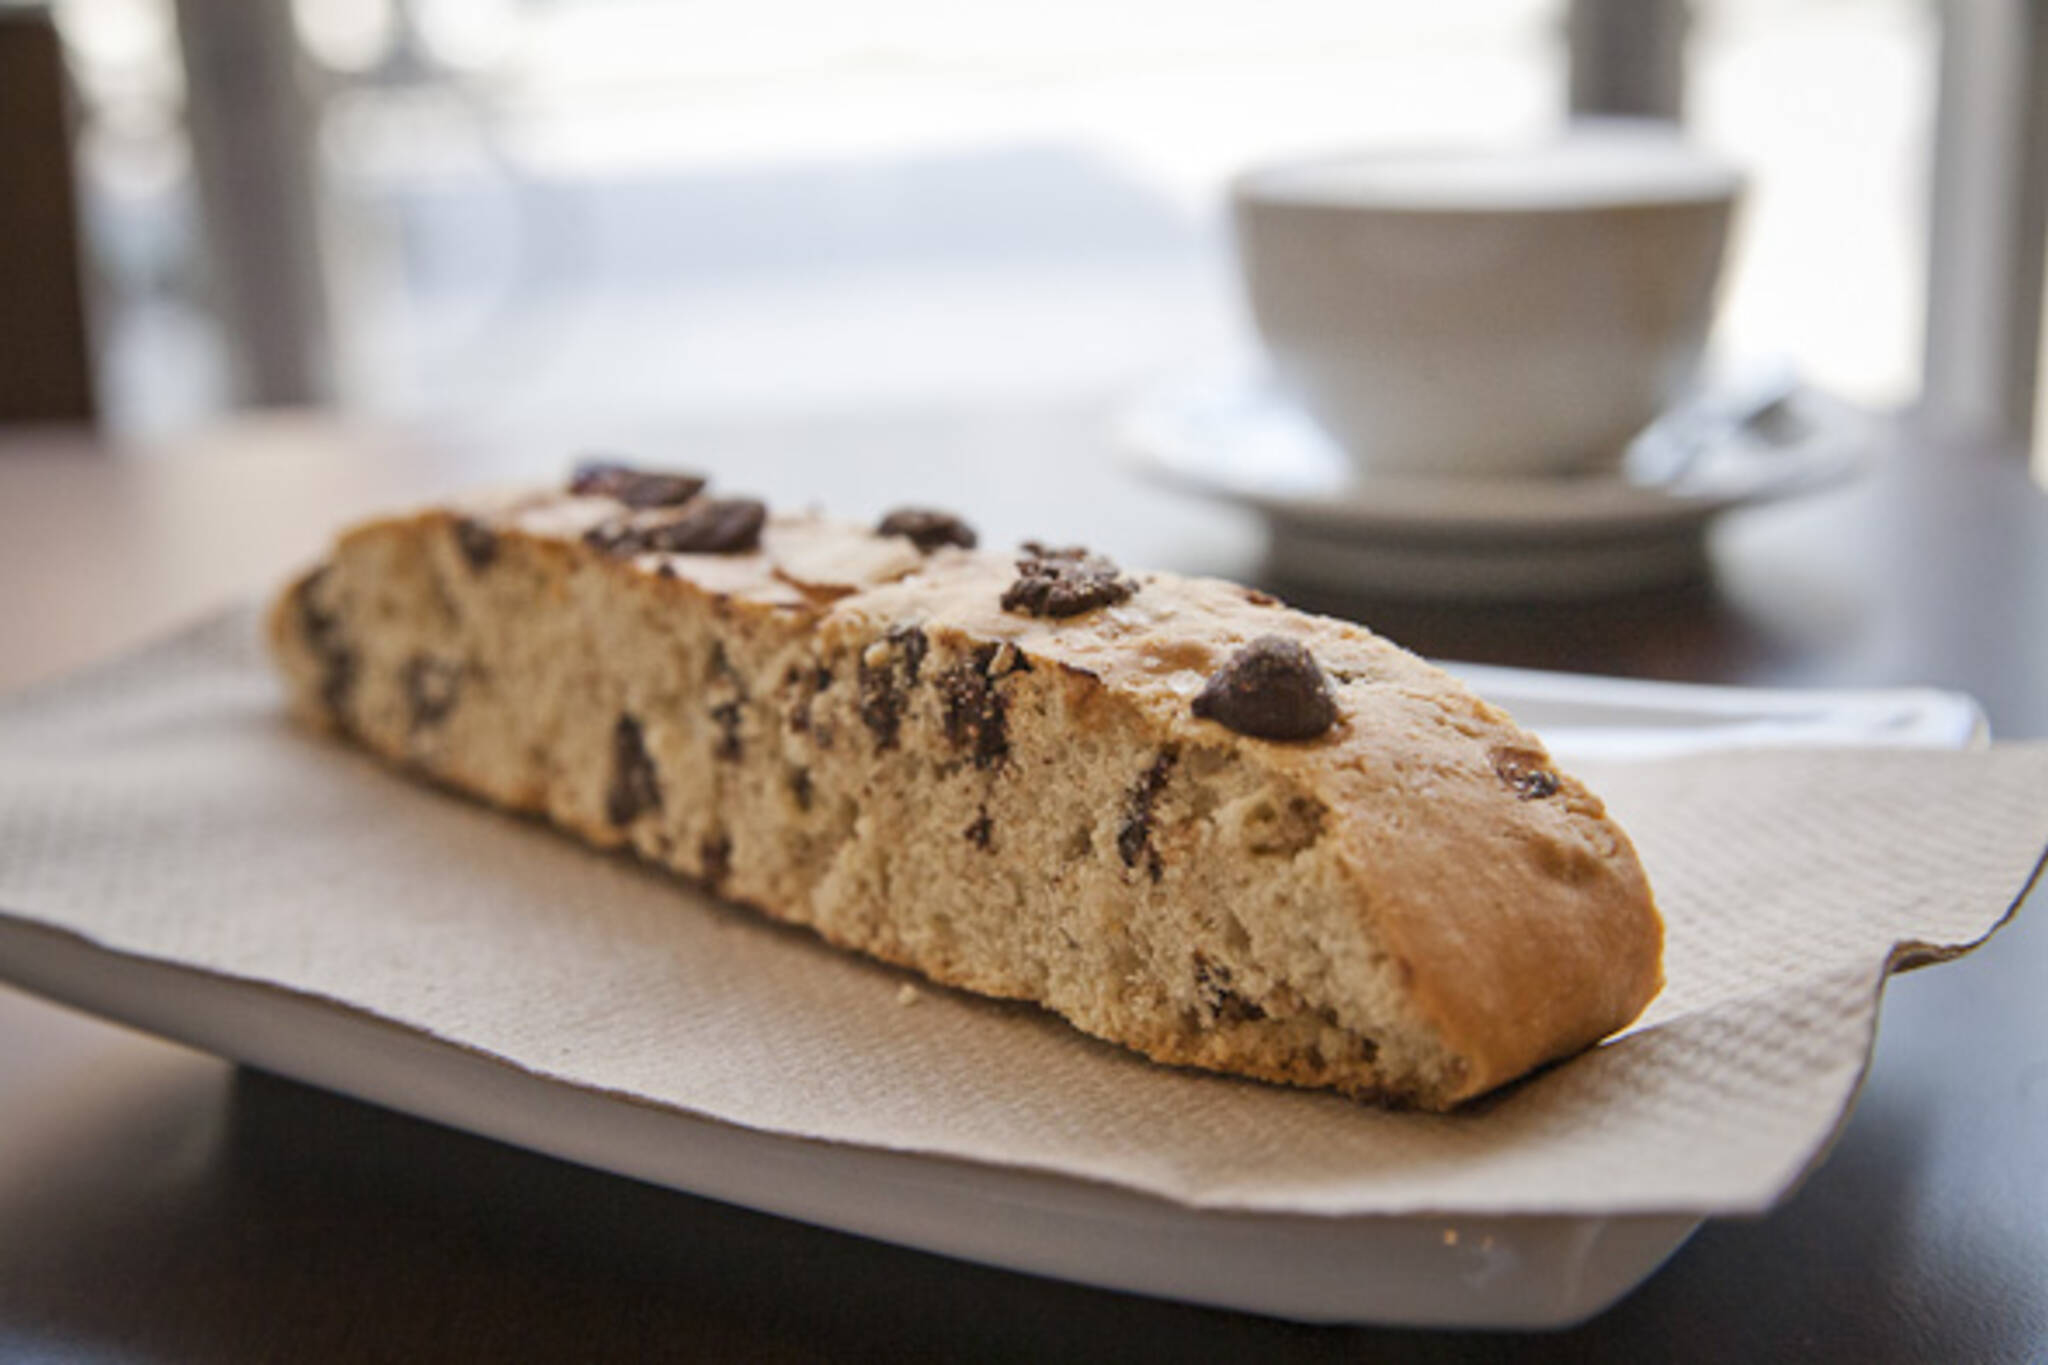 Toronto cafes baked goods